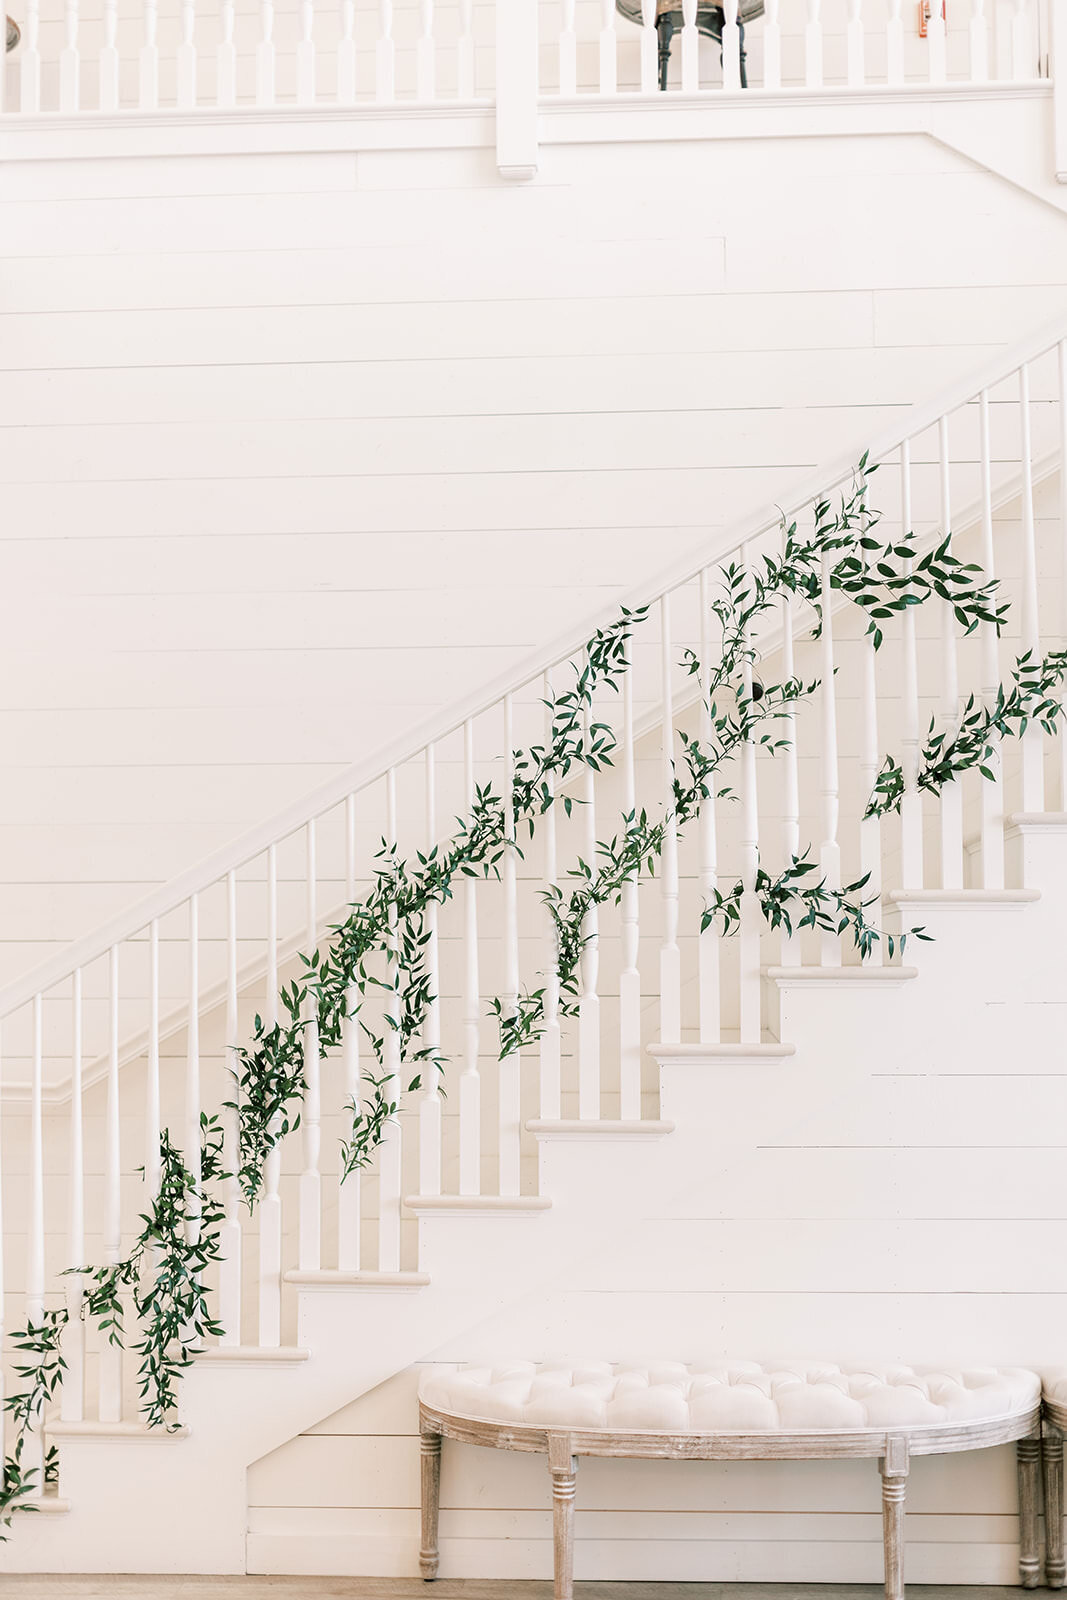 White stair case decorated with vines